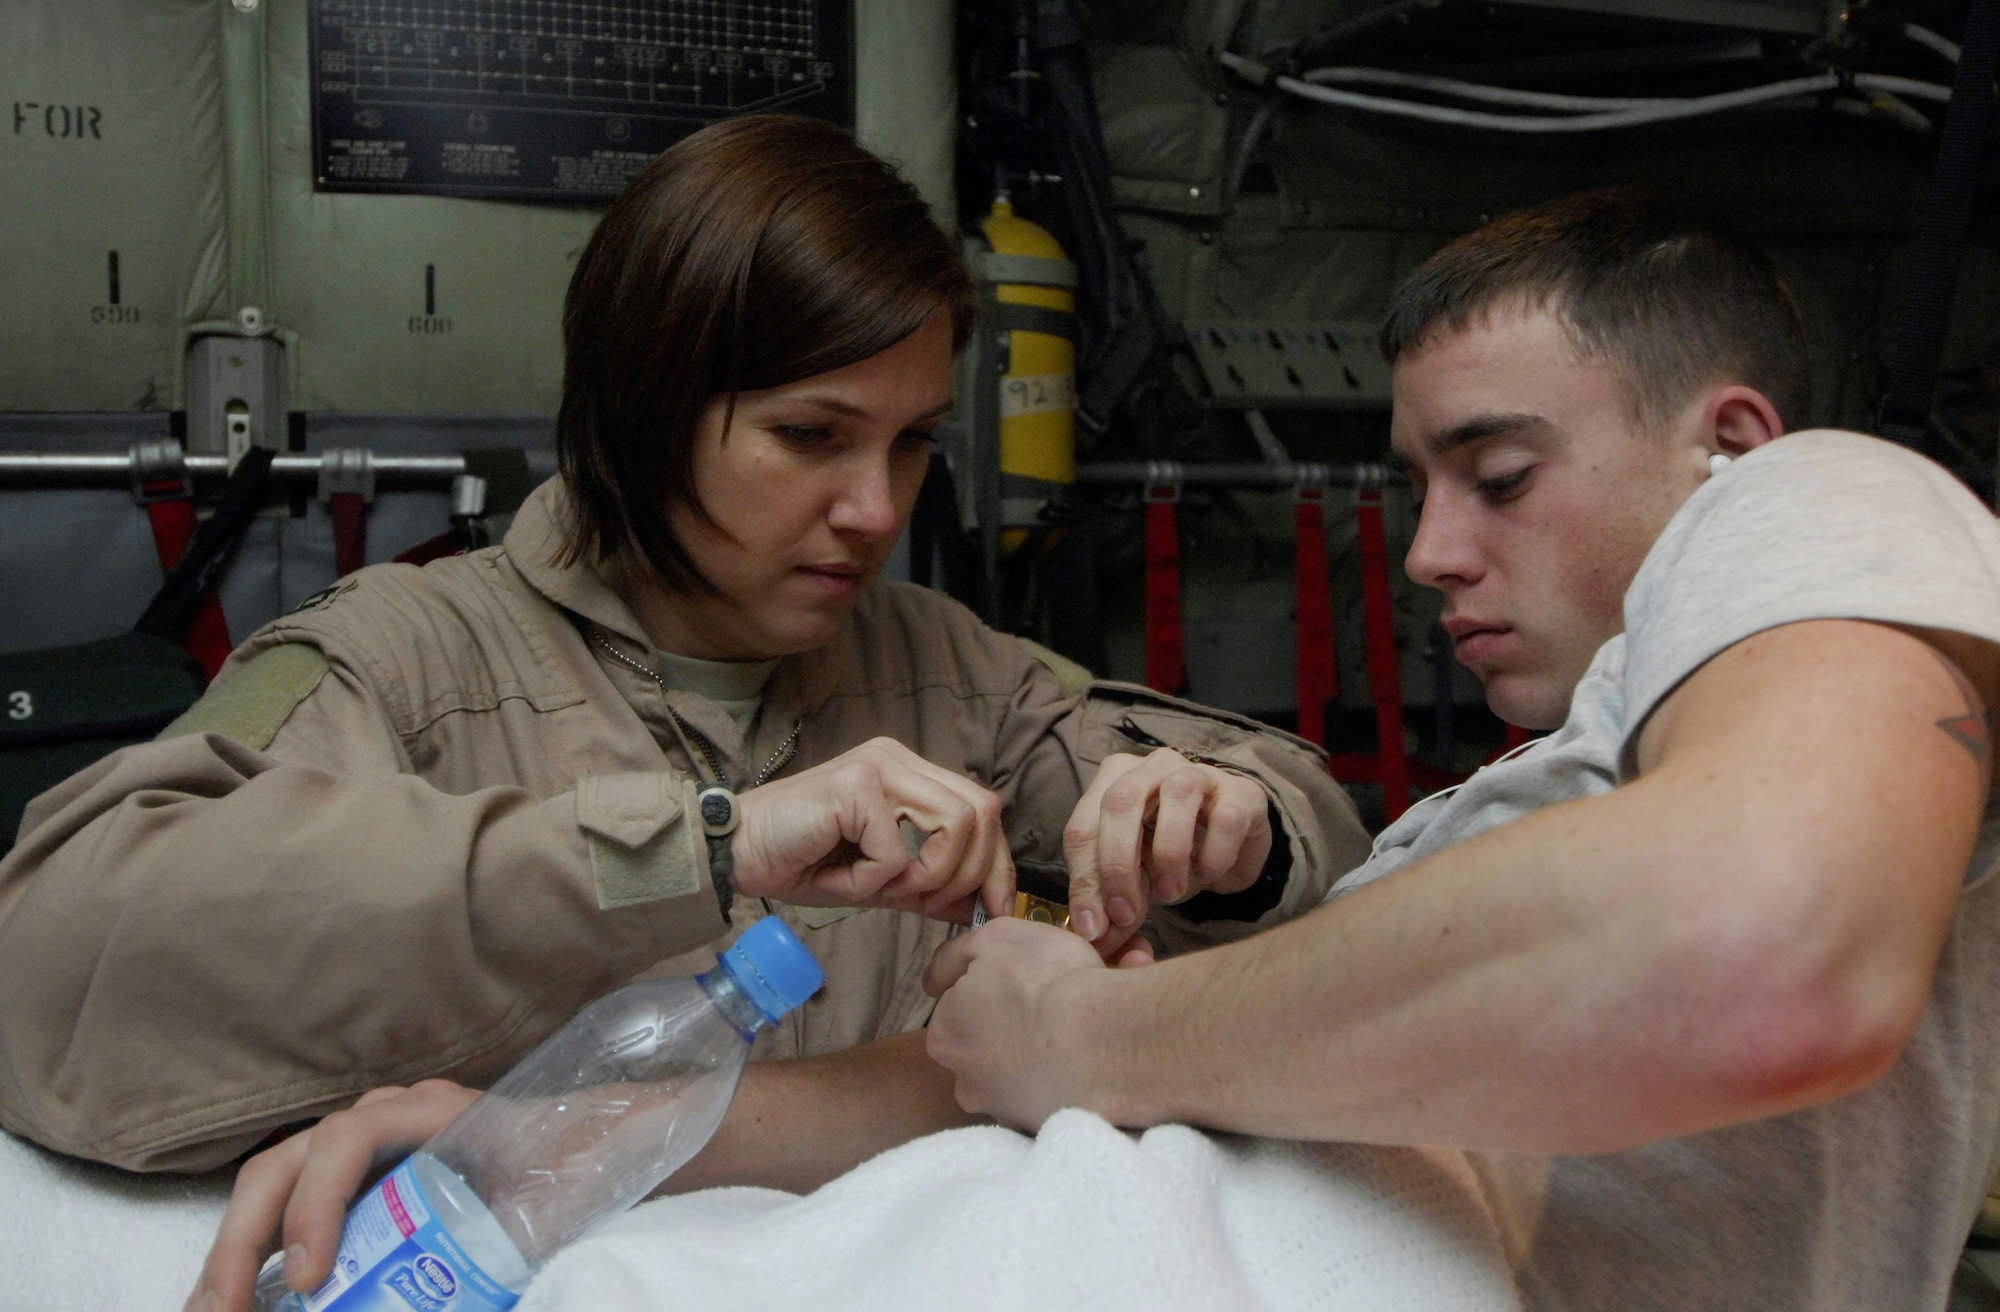 Capt. Susan McCormick gives medicine to Airman 1st Class Brent Noah March 26 during an aeromedical evacuation flight to Bagram Airfield, Afghanistan.  Airman Noah, assigned to the 376th Expeditionary Aircraft Maintenance Squadron at Manas Air Base, Kyrgyzstan, dislocated his hip and was being flown to Bagram Airfield for treatment.  Captain McCormick is a flight nurse with the 455th Expeditionary Aeromedical Evacuation Flight at Bagram.  (U.S. Air Force photo/Senior Airman Erik Cardenas)